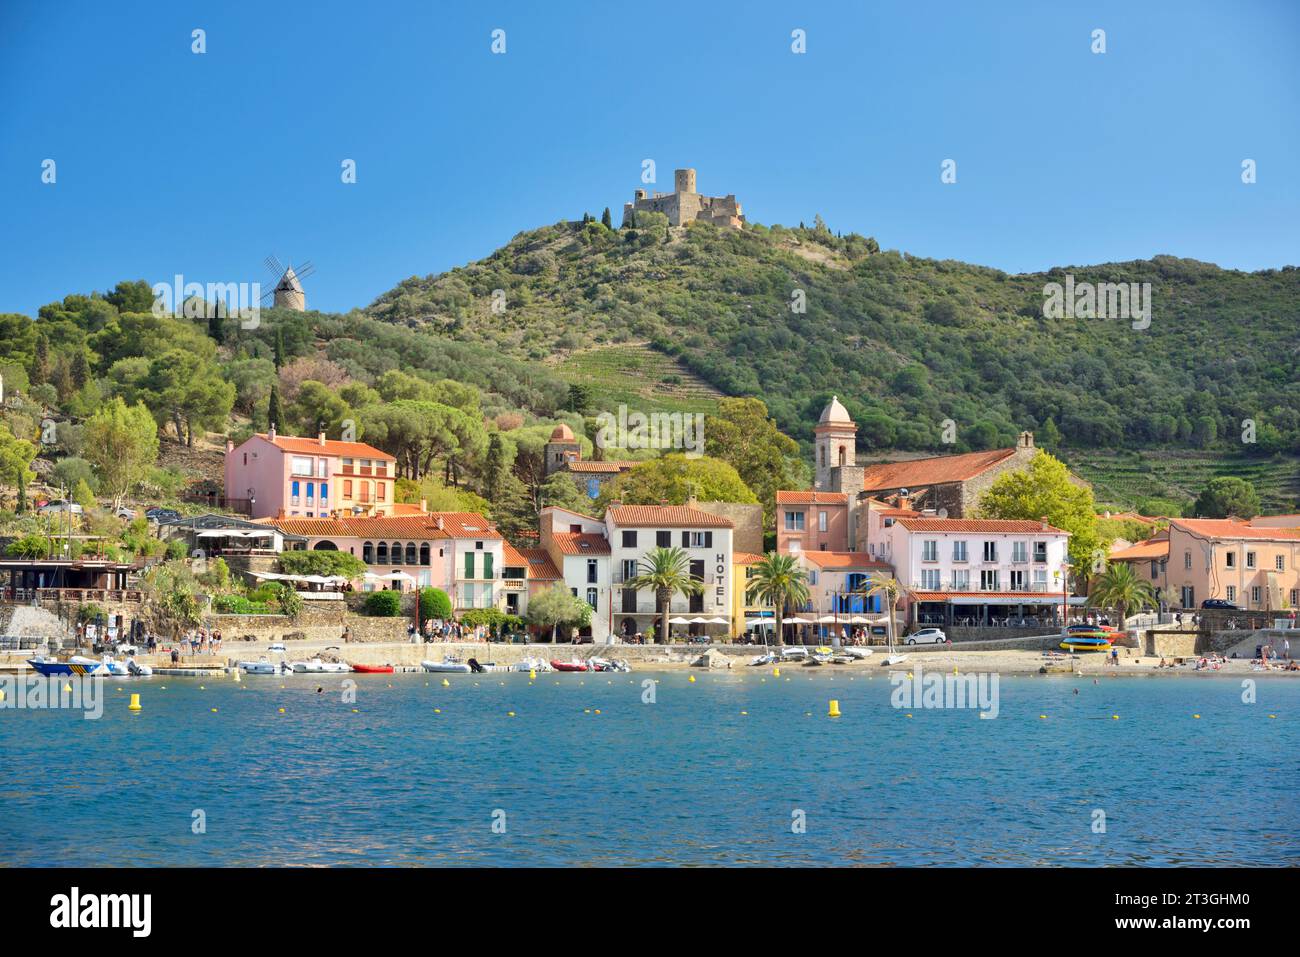 France, Pyrenees Orientales, Cote vermeille, Collioure, Port d'Avall beach, overlooked by the Windmill and Saint Elme fort Stock Photo